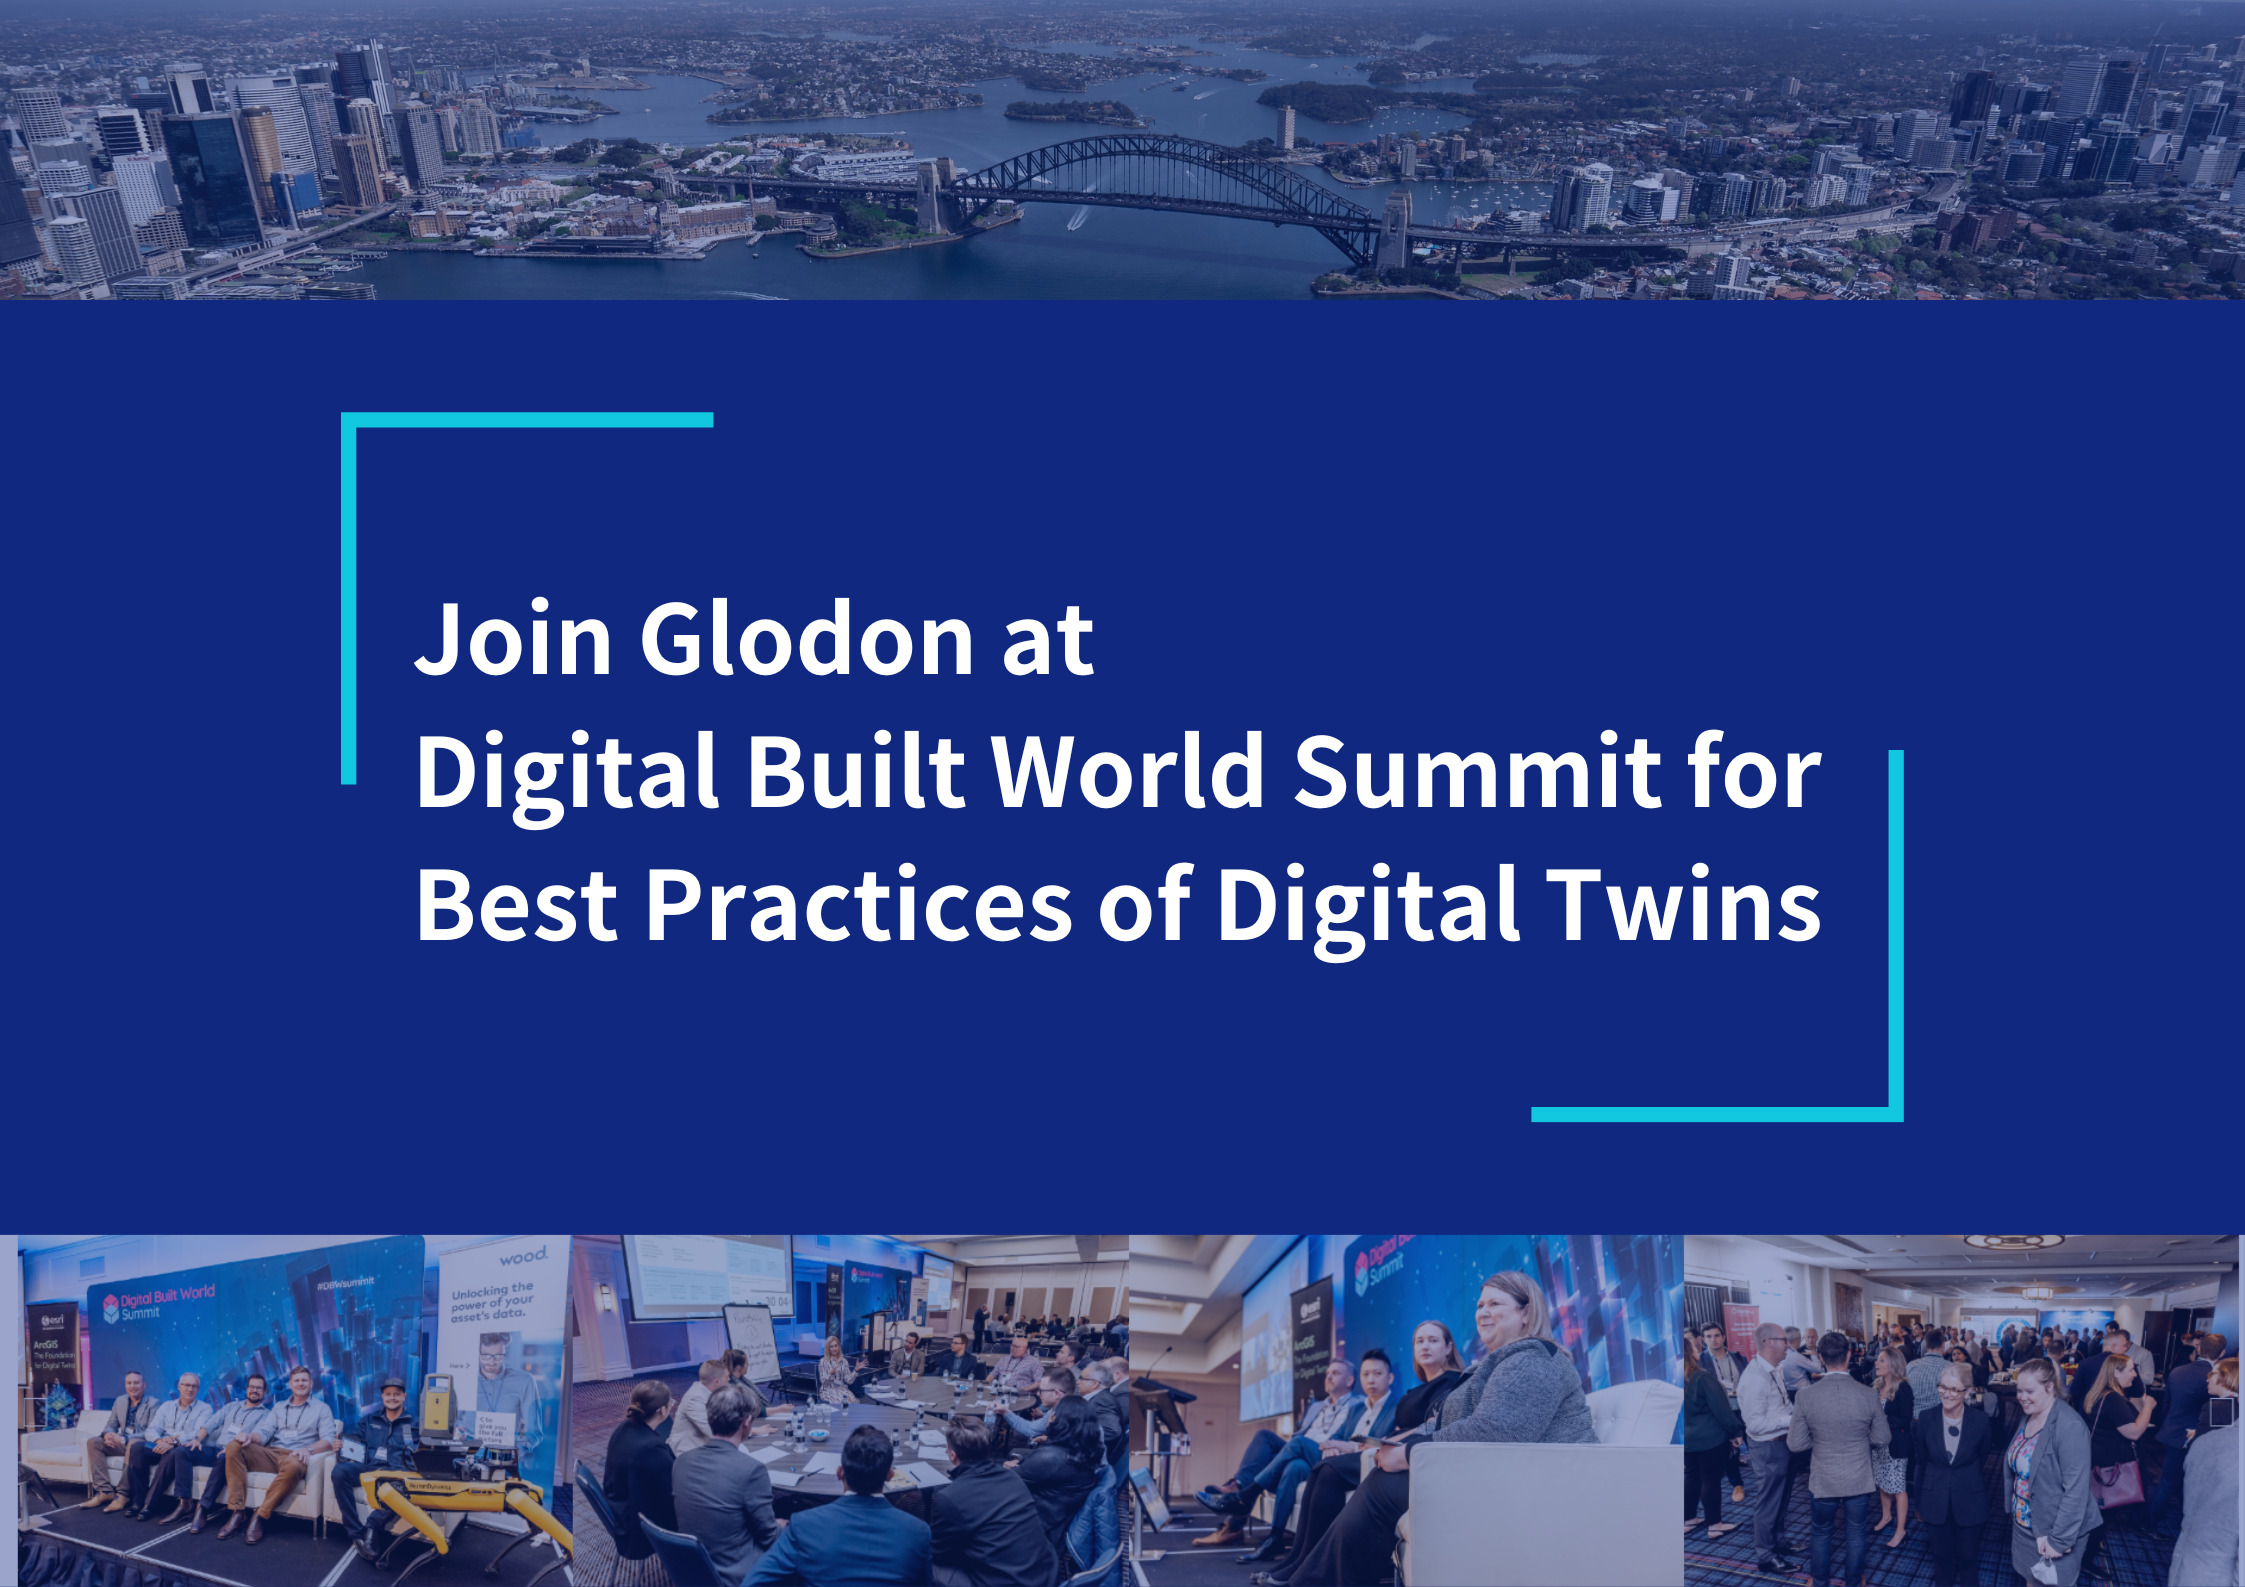 Join Glodon at Digital Built World Summit for Best Practices of Digital Twins